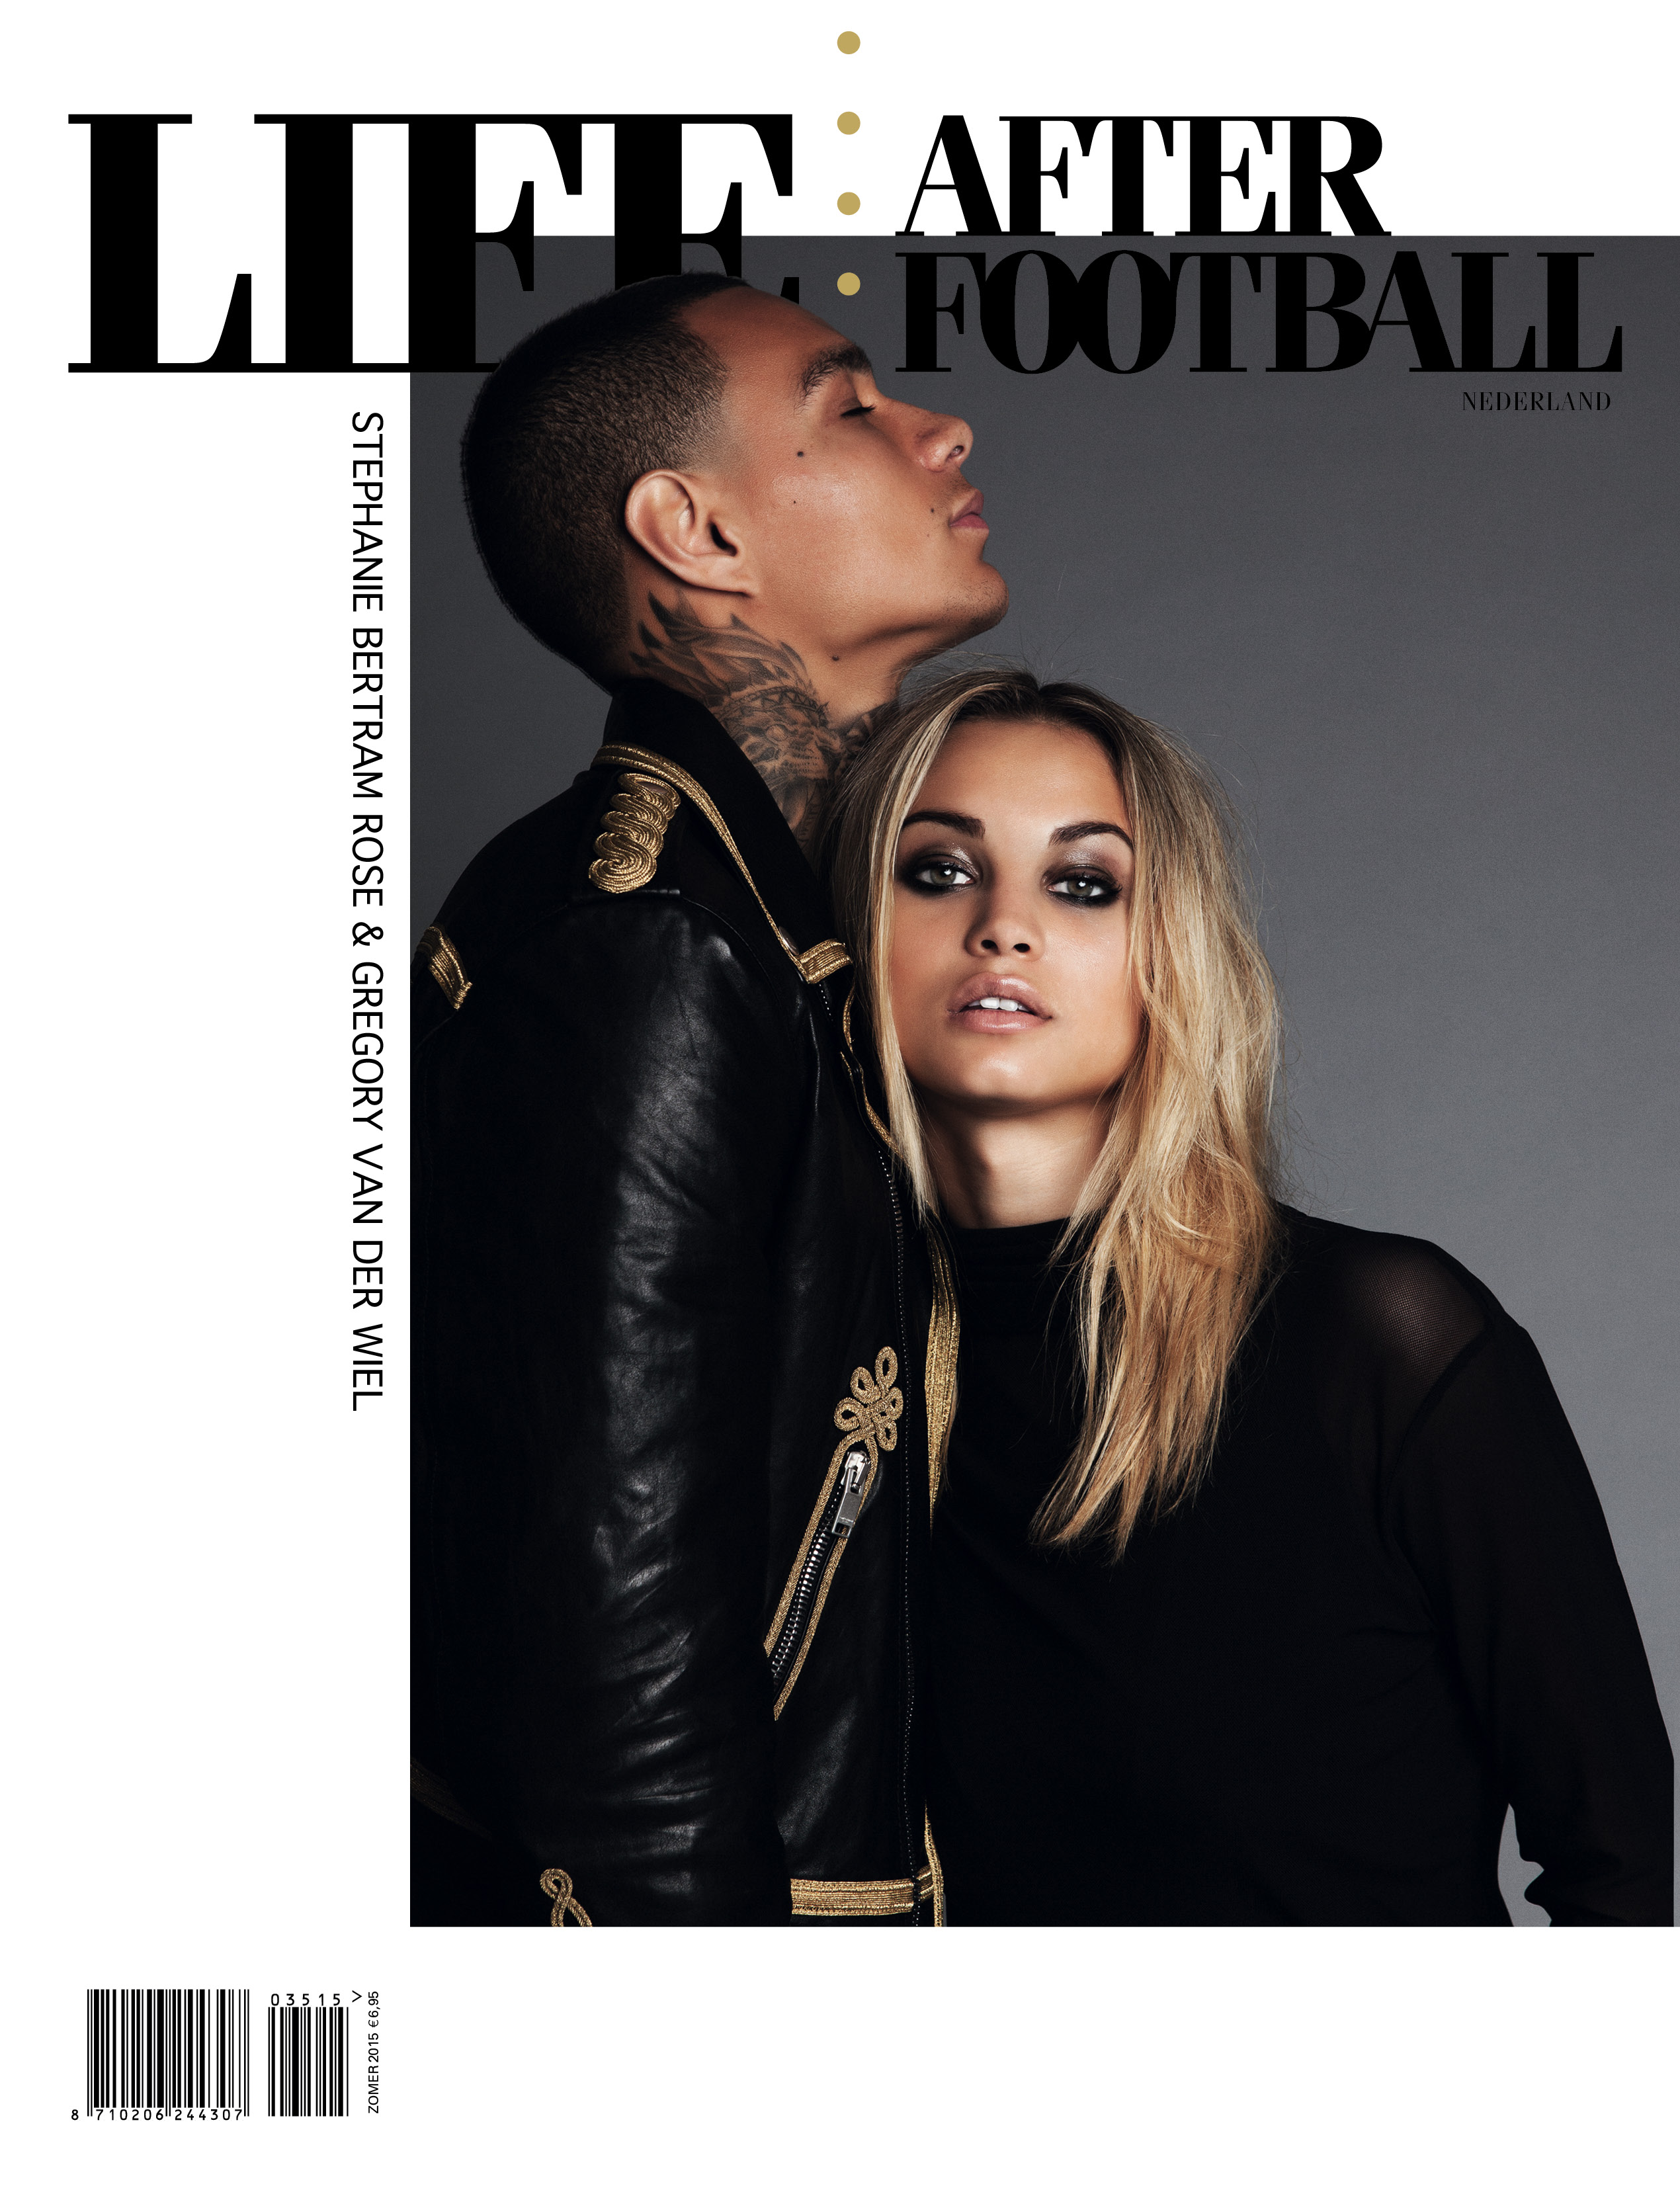 Gregory van der Wiel Goes High Fashion for Life After Football – The  Fashionisto